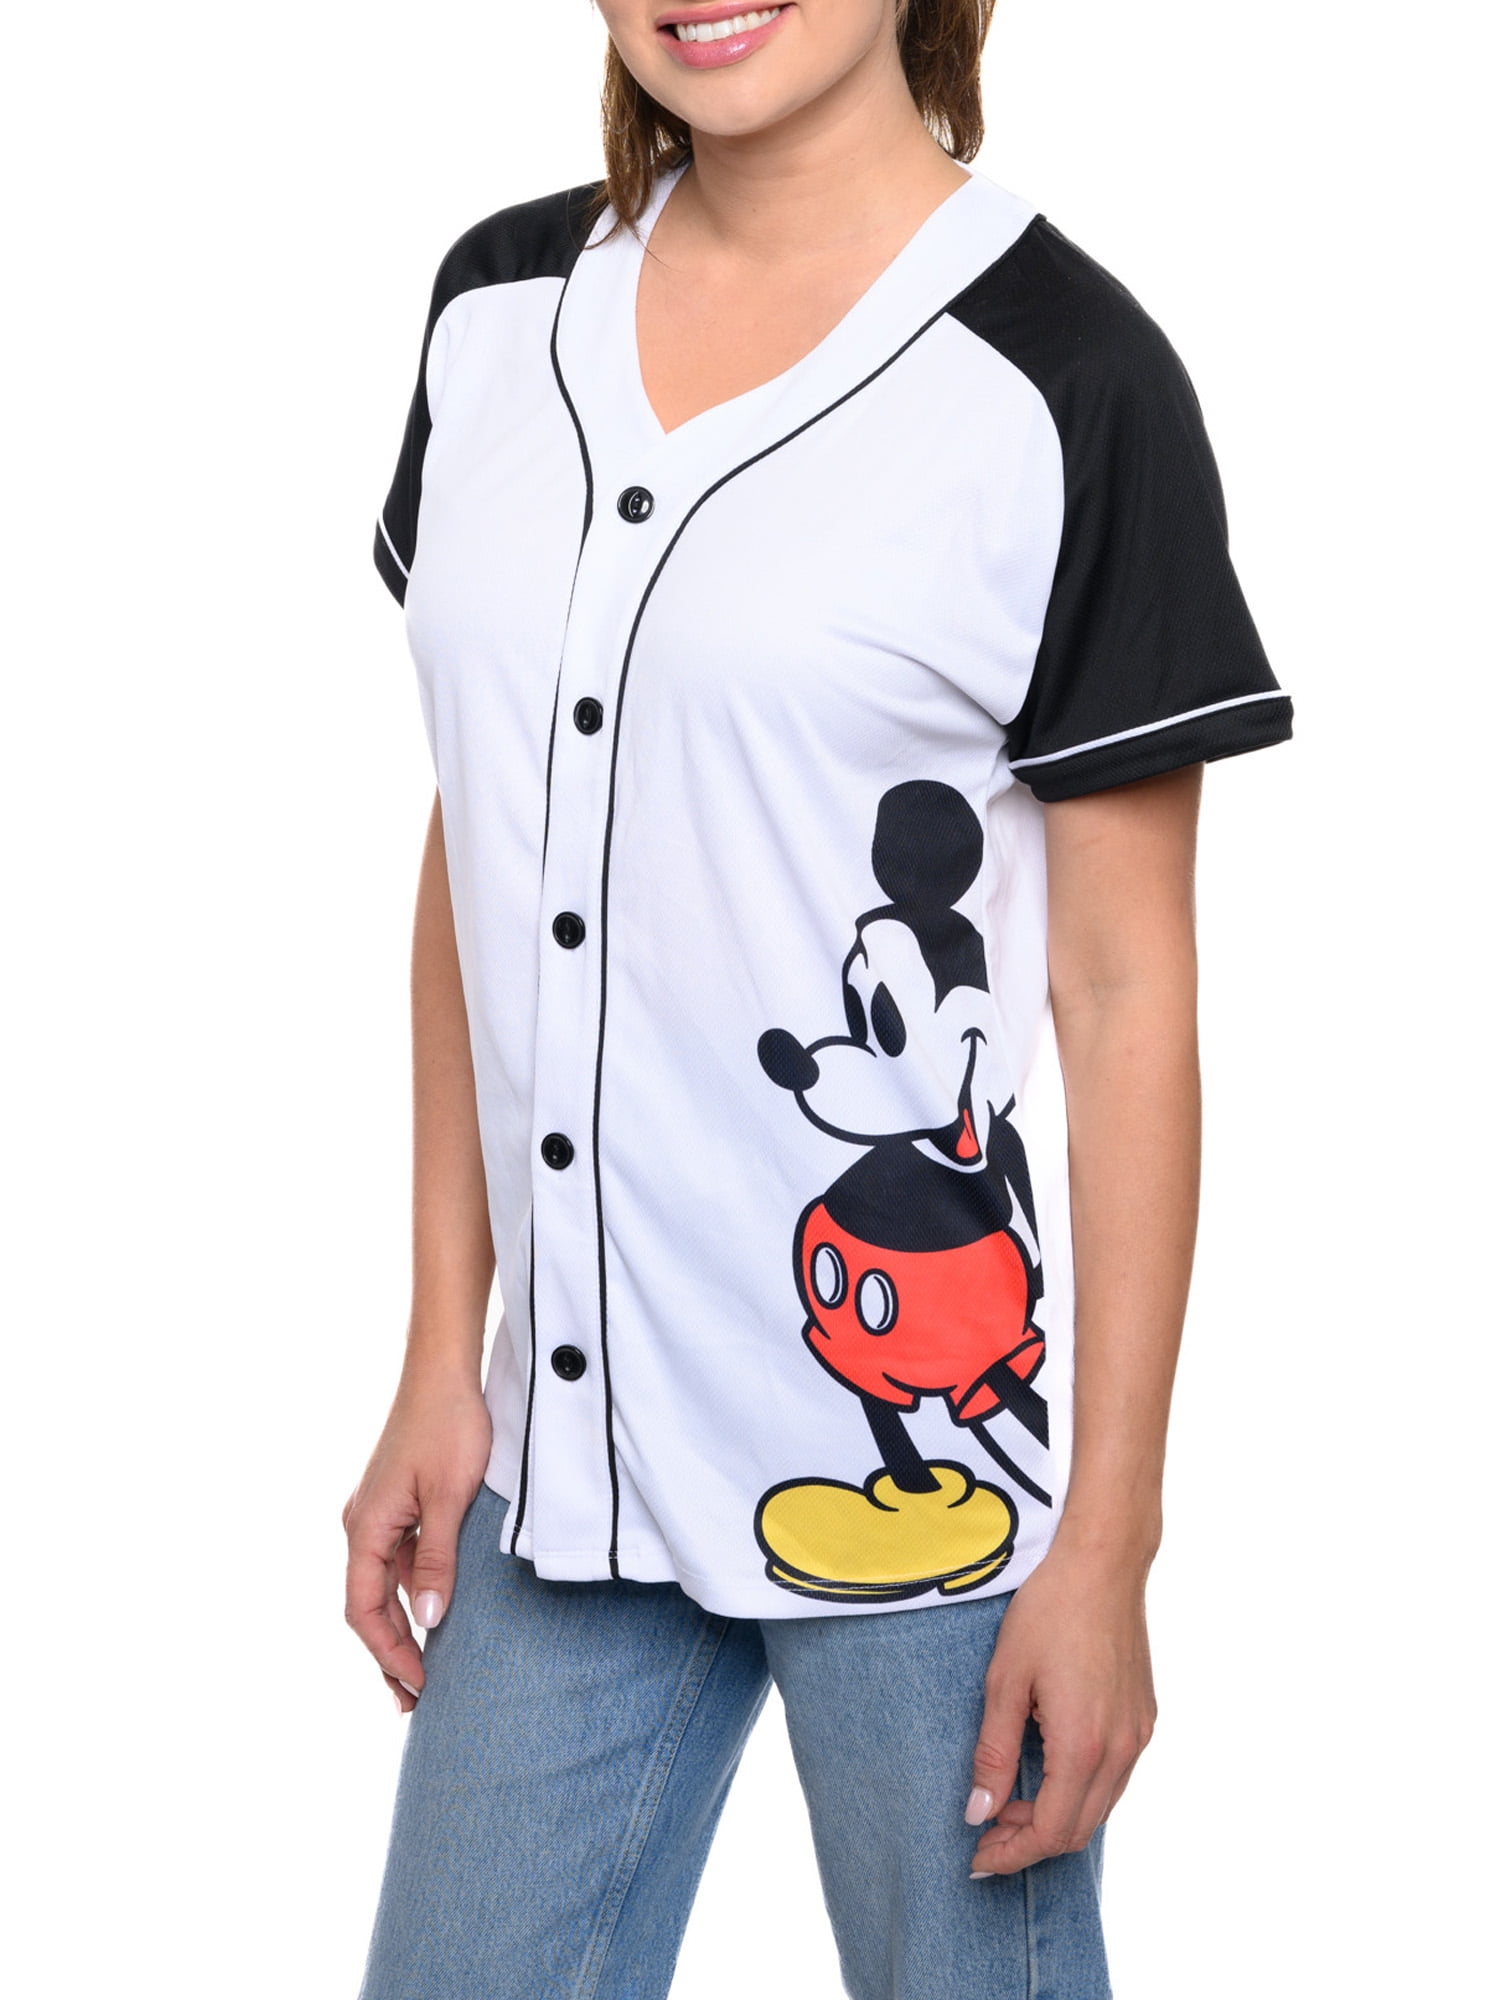 Mickey Mouse x Boston Red Sox Jersey White - Scesy